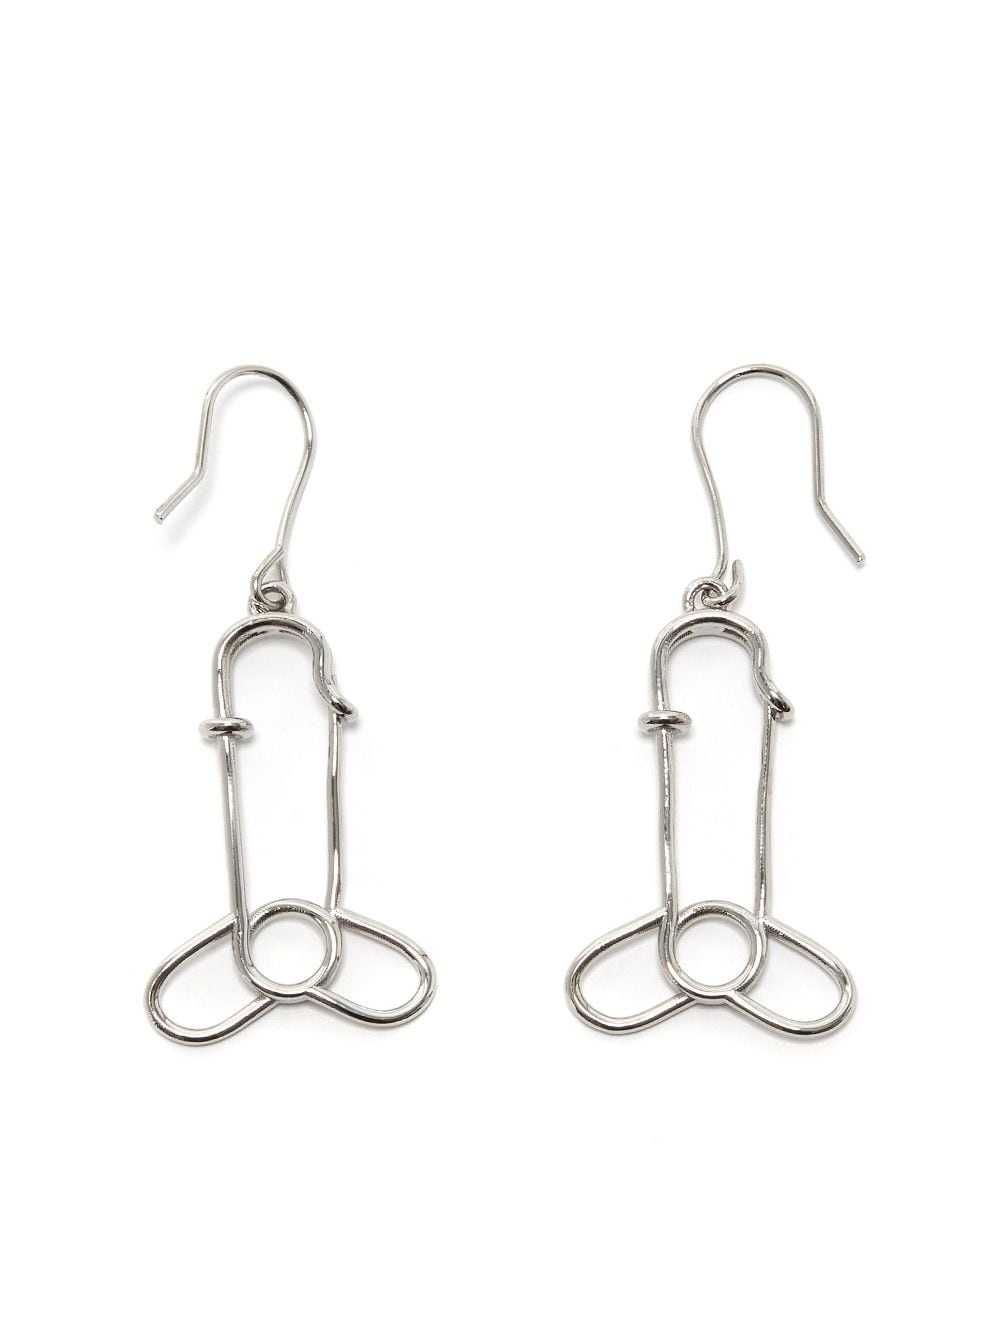 safety-pin pendant earrings - 2